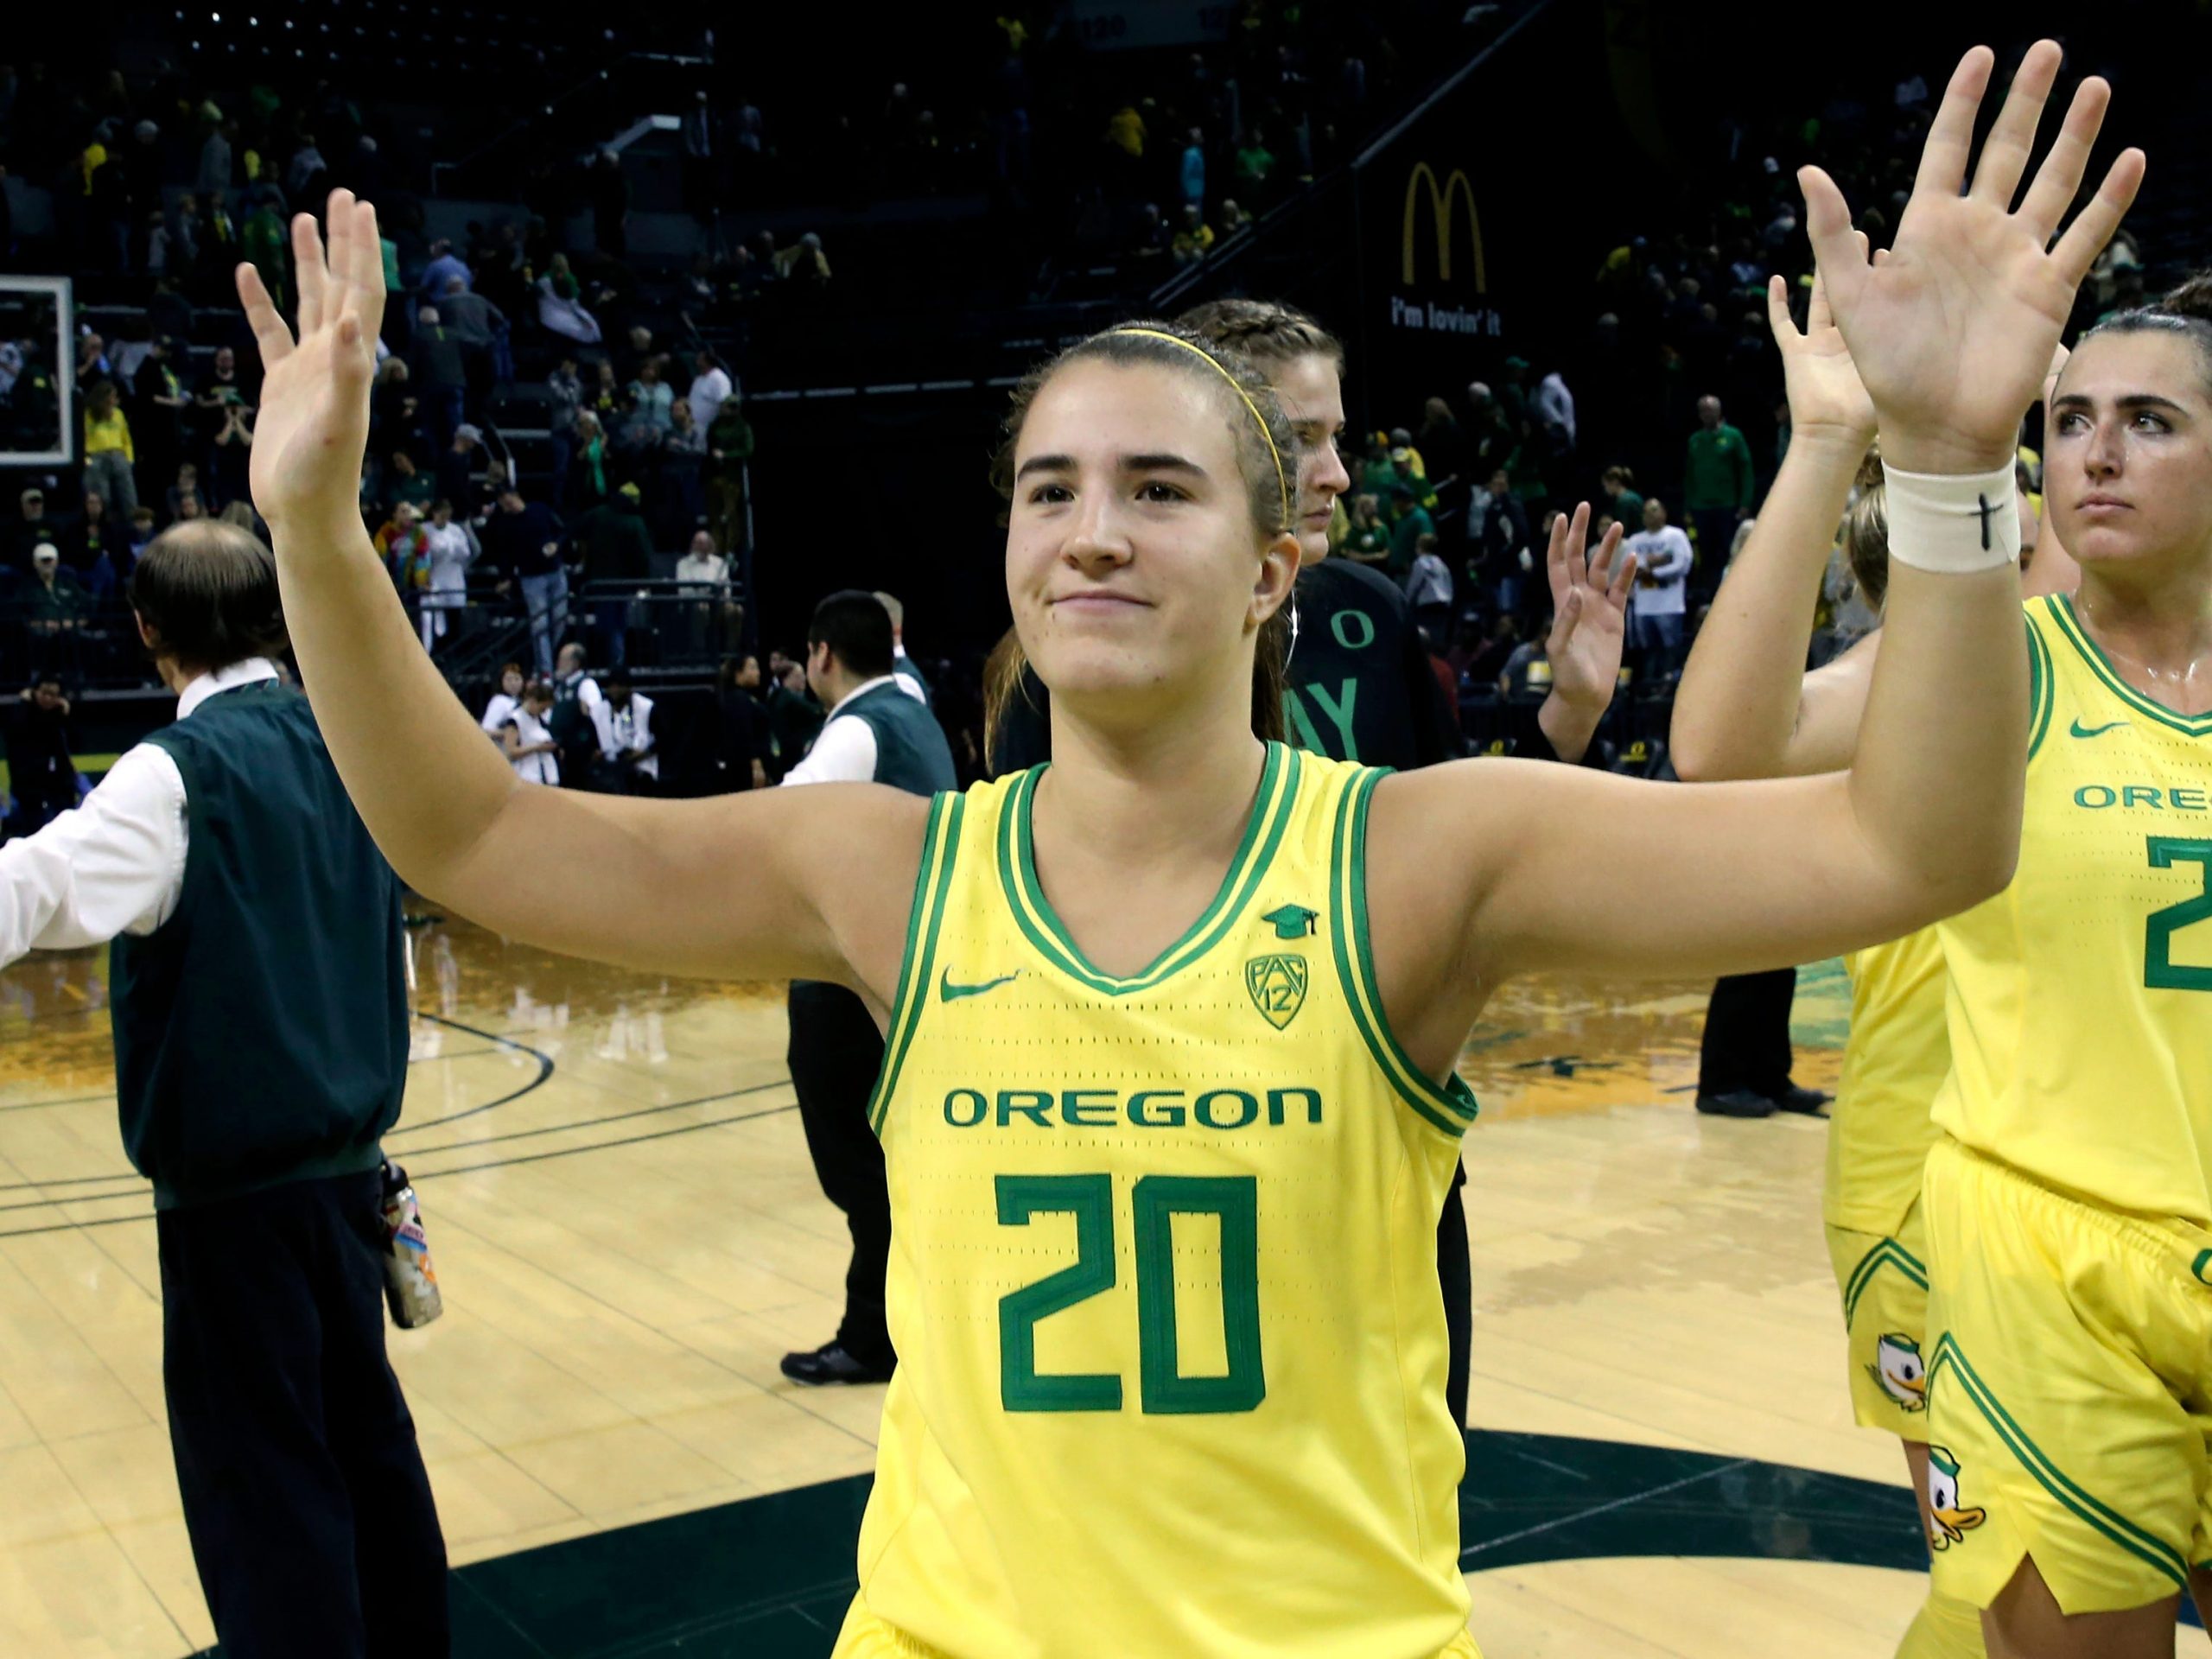 FILE - In this Nov. 16, 2019, file photo, Oregon's Sabrina Ionescu acknowledges the crowd with teammates after an NCAA college basketball game against Texas Southern in Eugene, Ore. Ionescu capped off a unprecedented college career by entering an exclusive club. Oregon's star guard was a unanimous choice Monday, March 23, 2020, as The Associated Press women's basketball player of the year. She was only the second player ever to the lone recipient of votes, joining Breanna Stewart, since the award was first given in 1995. (AP Photo/Chris Pietsch, FIle)